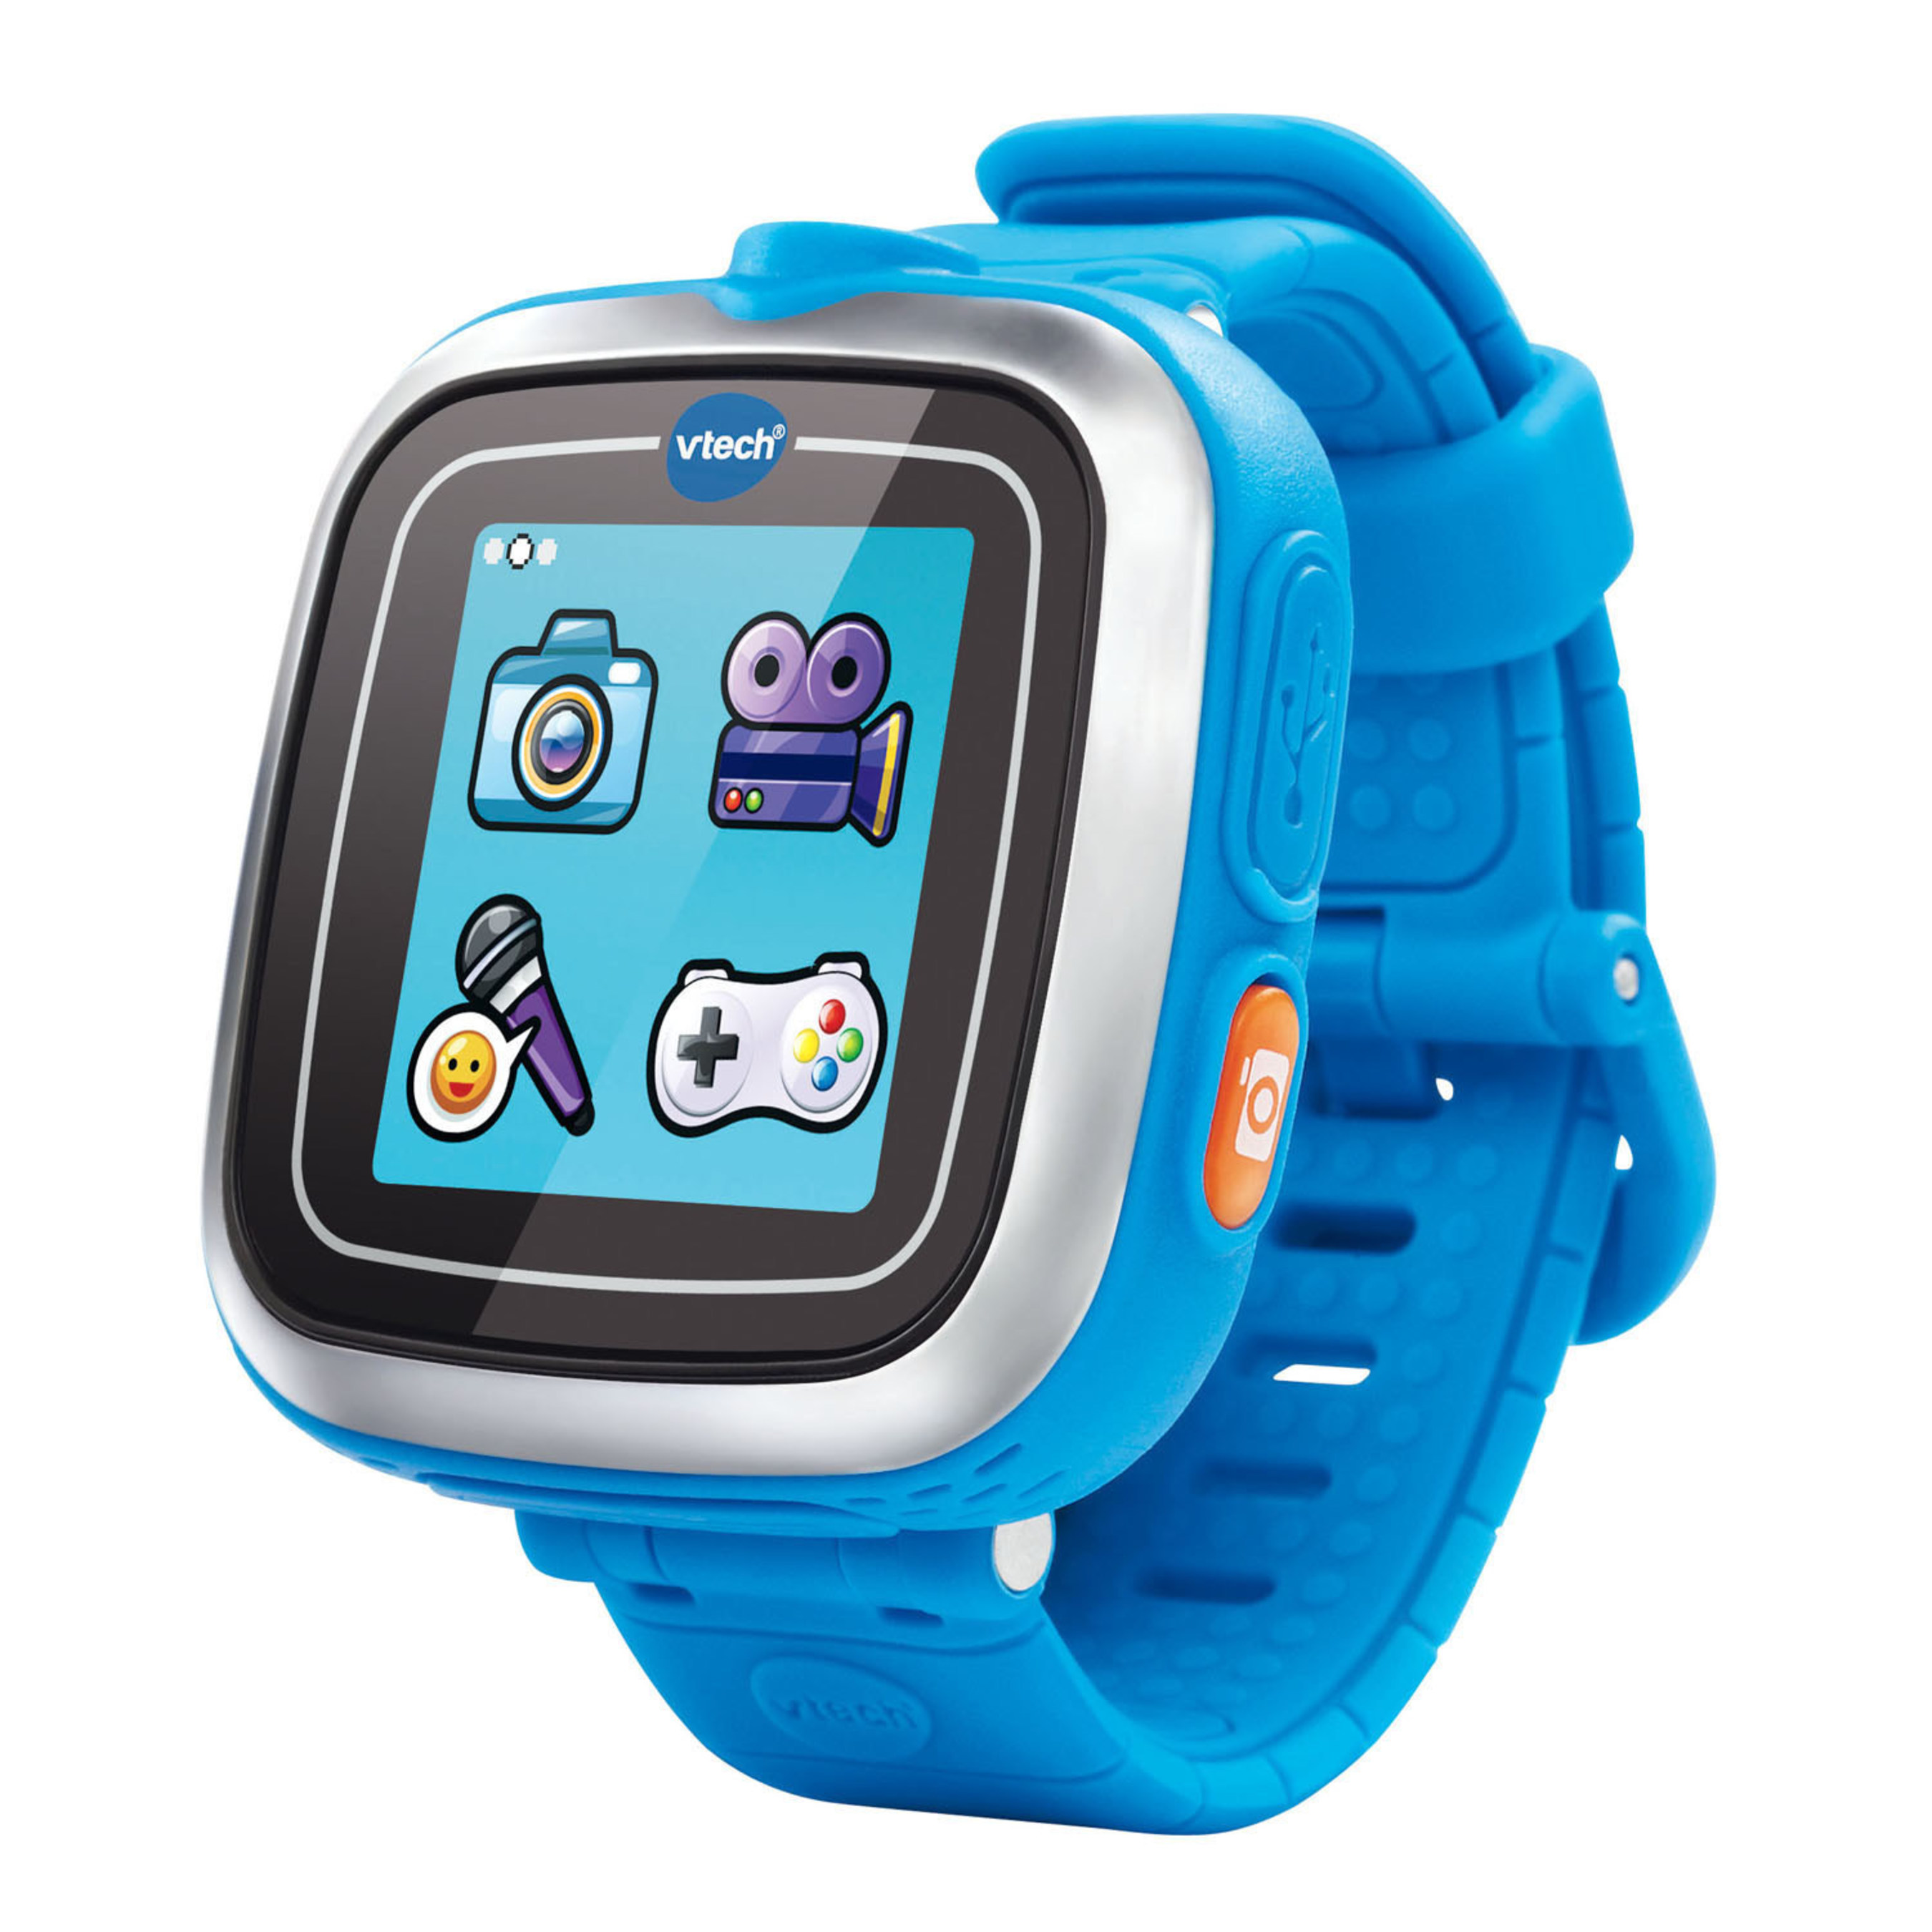 Vtech Kidizoom Smartwatch Now Available In Exclusive New Colors